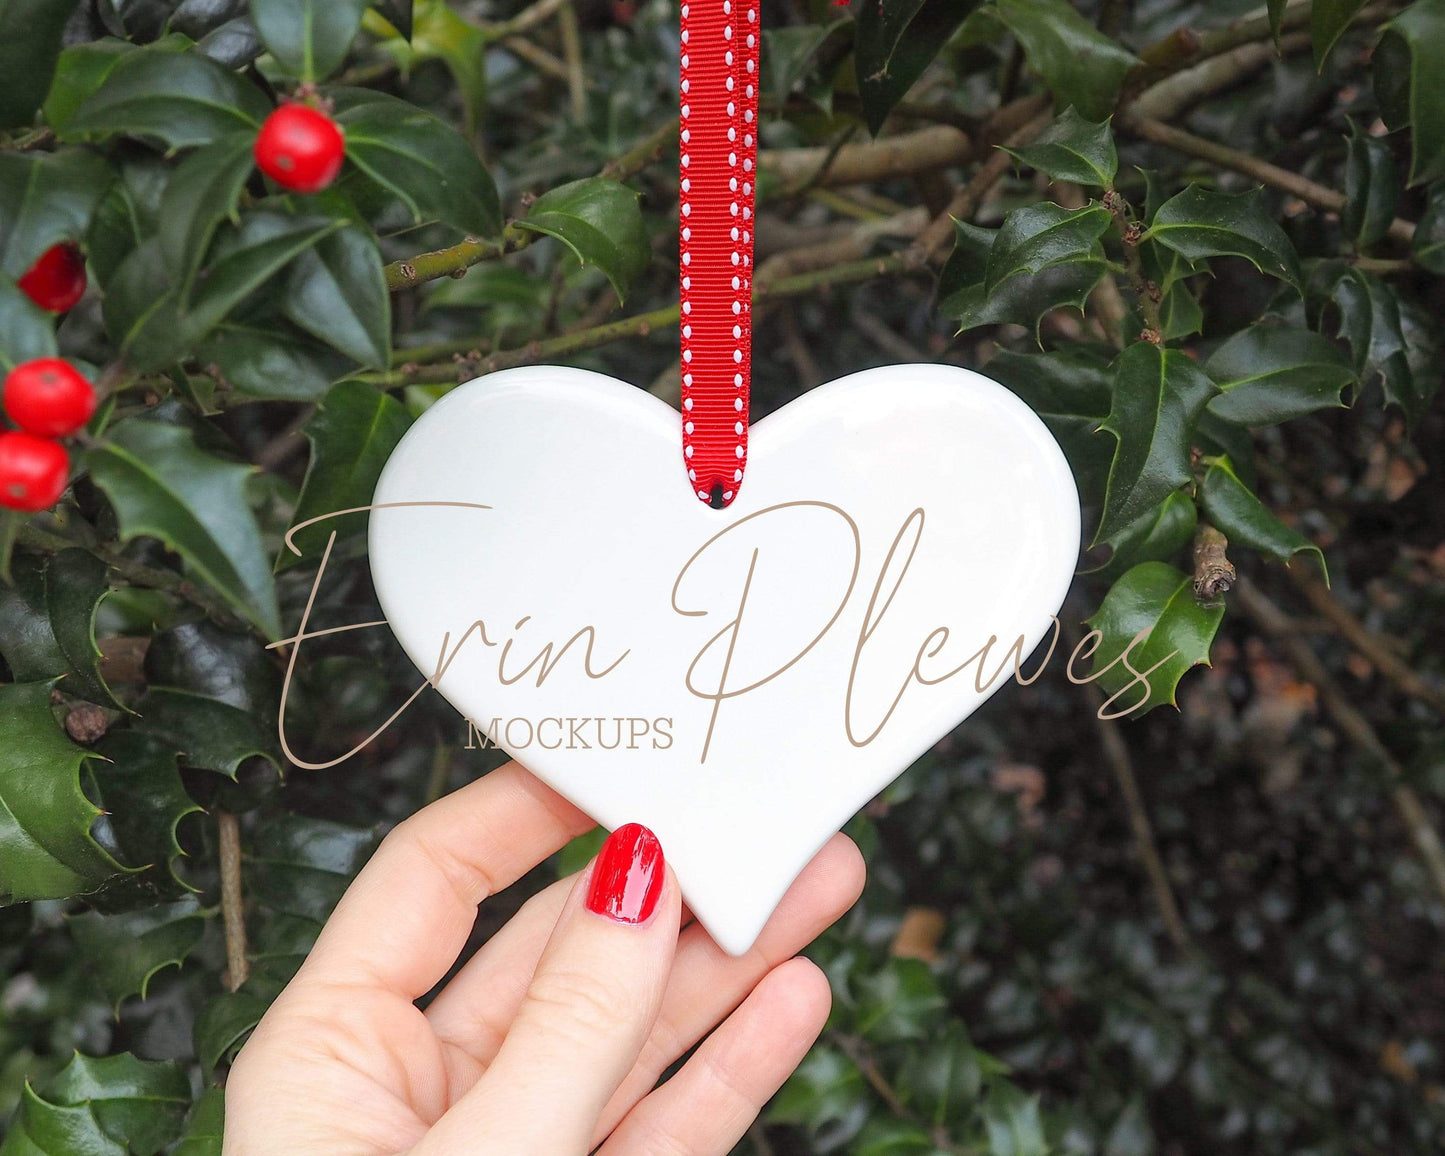 Erin Plewes Mockups Heart ornament mockup, blank holiday decoration mock-up for wedding lifestyle stock photography, JPG Instant Digital Download template